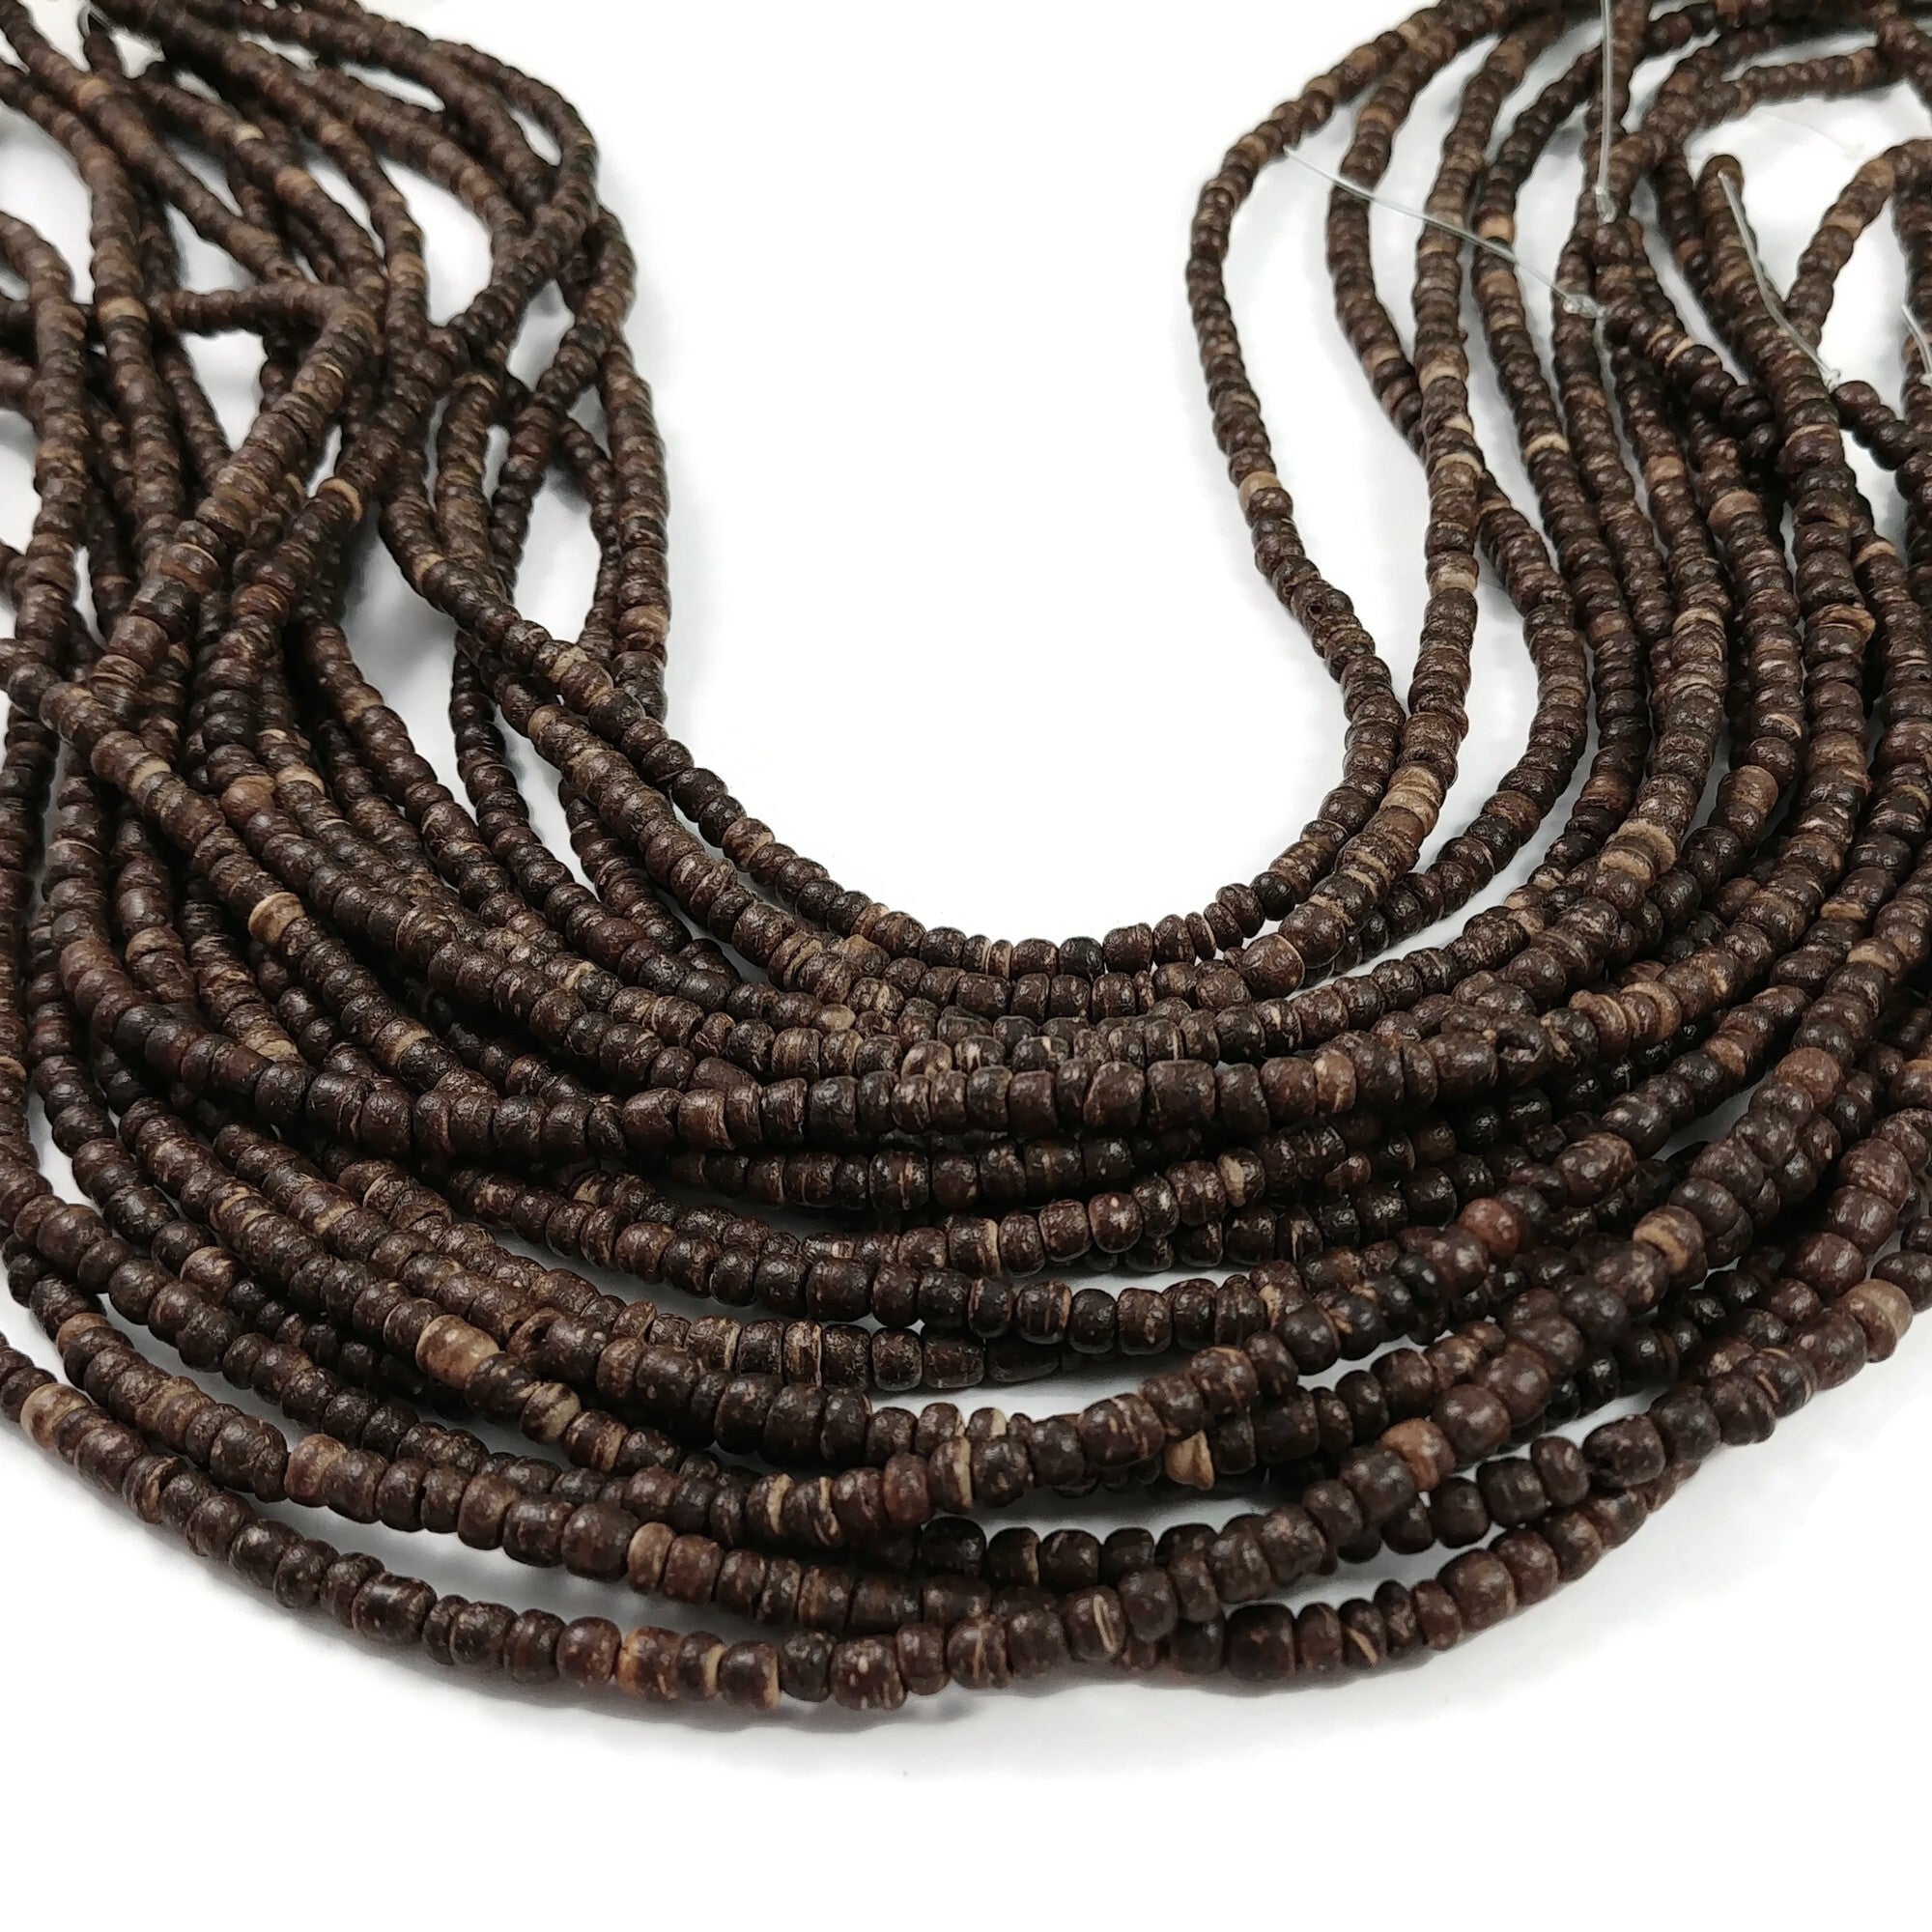 3mm tiny coconut beads - Five colors available